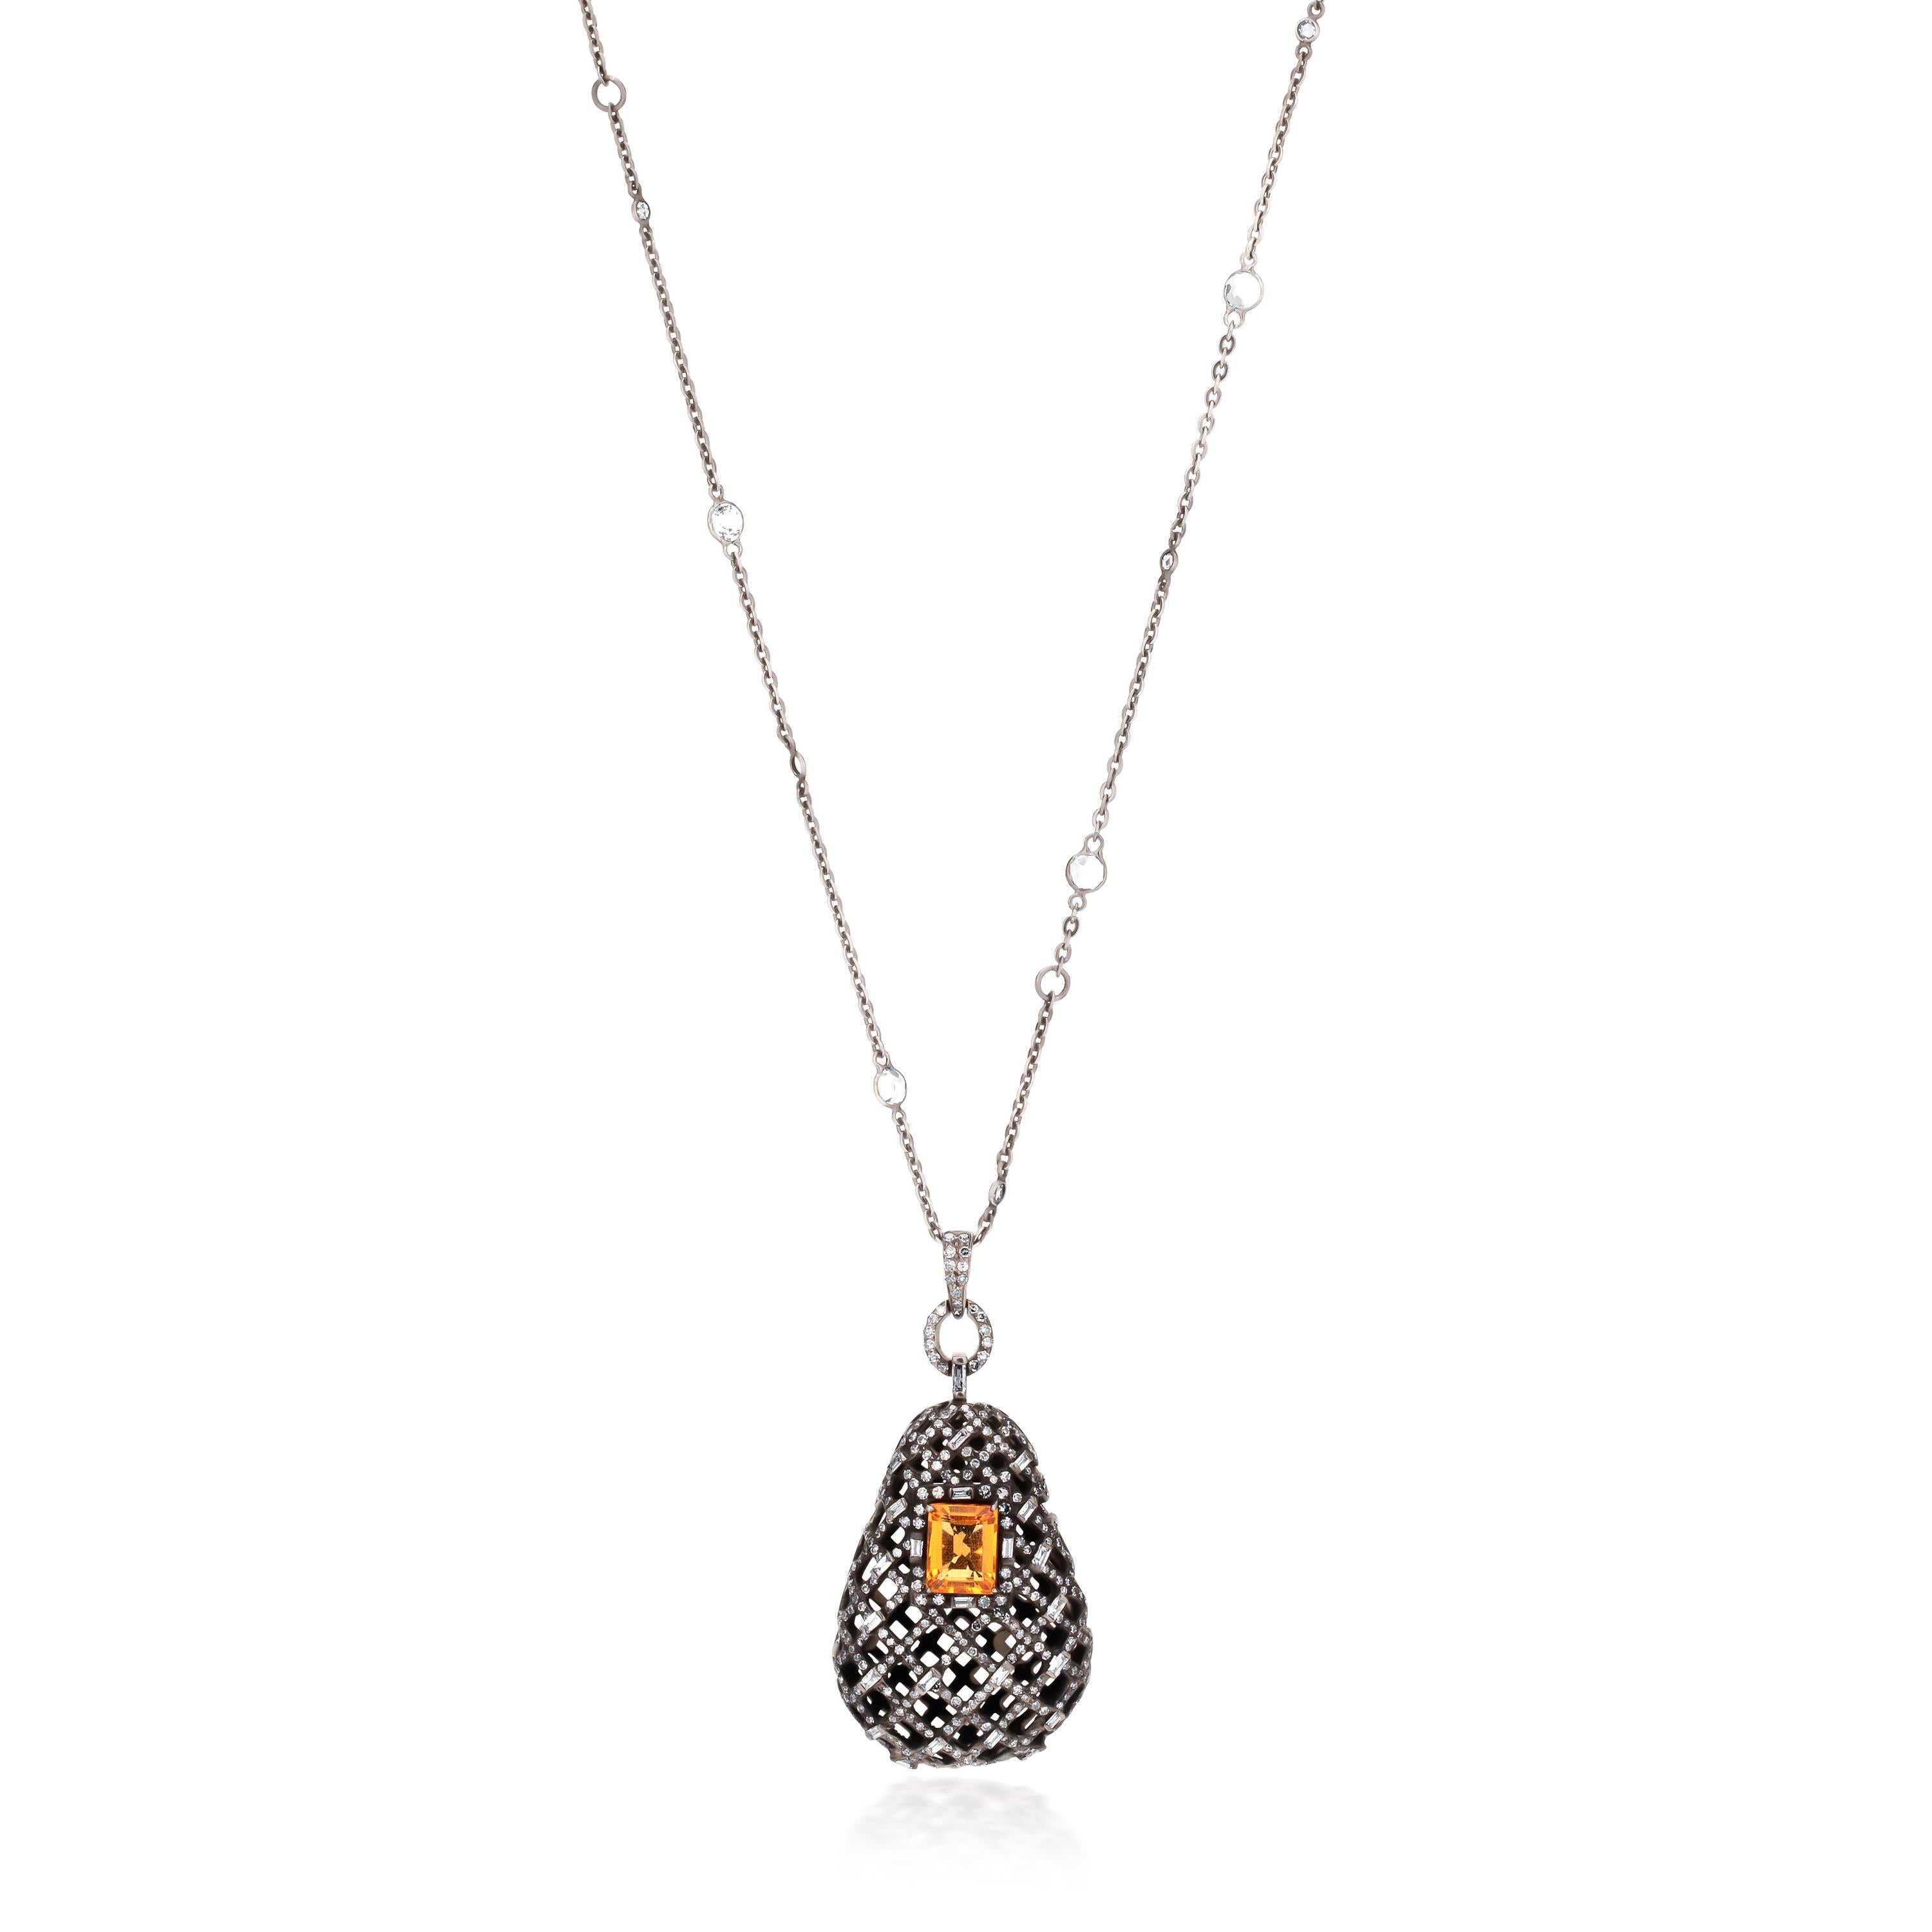 This dramatic antique dazzler showcases a pierced bell-shaped open space ornate pendant. The black bell-shaped pendant holds an emerald cut bold rectangular citrine at its center. The mesmerizing citrine sits amidst rows of baguette, pear, round,